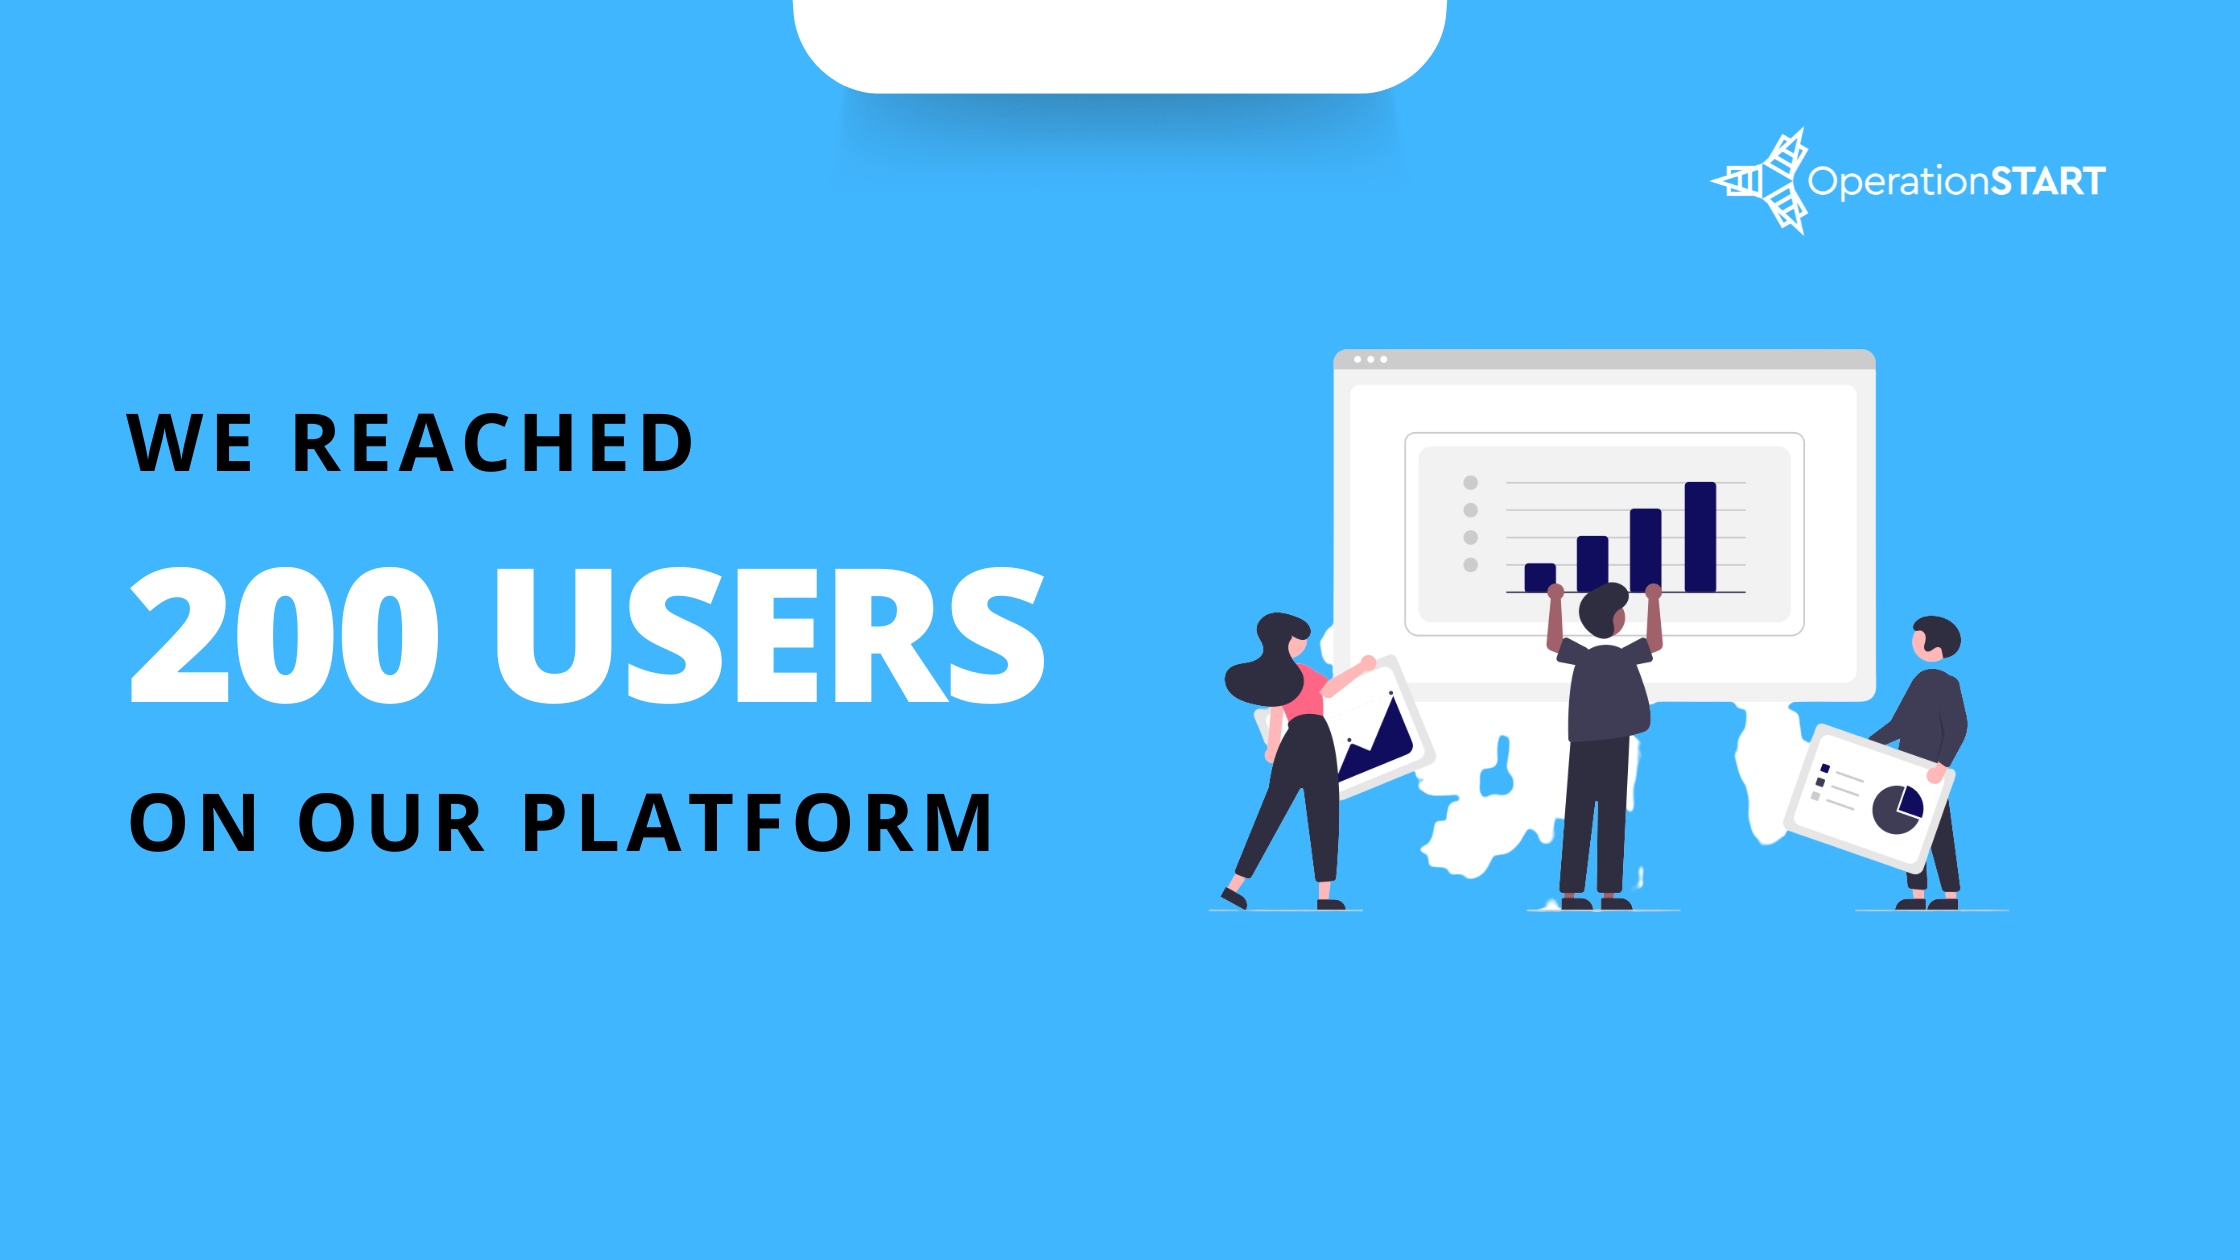 We reached 200 users on our platform